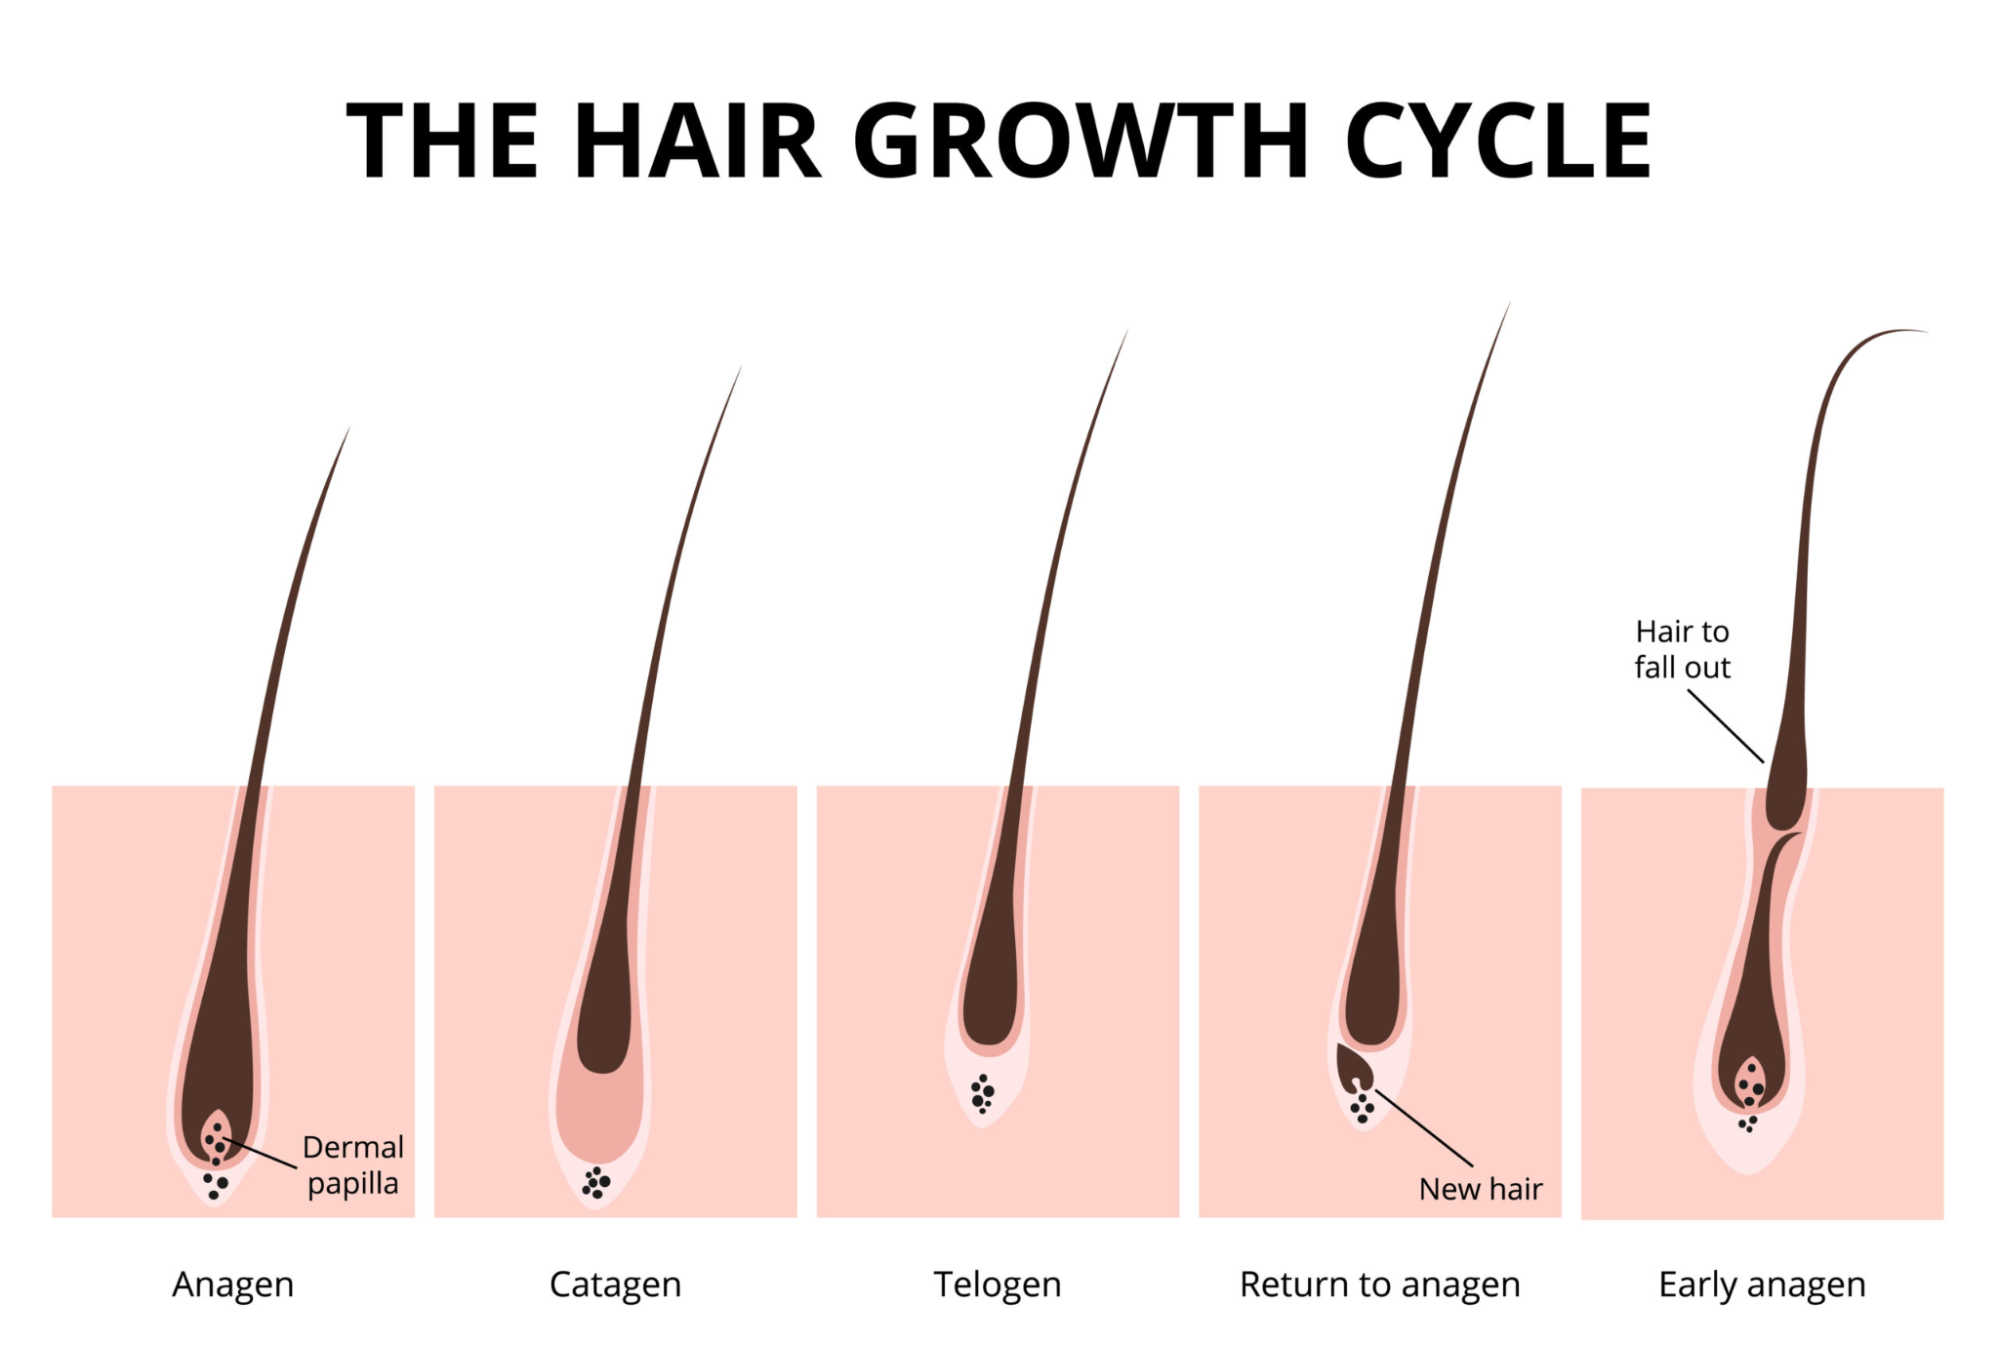 The hair growth cycle. The laser works only for the active growth stage - anagen.